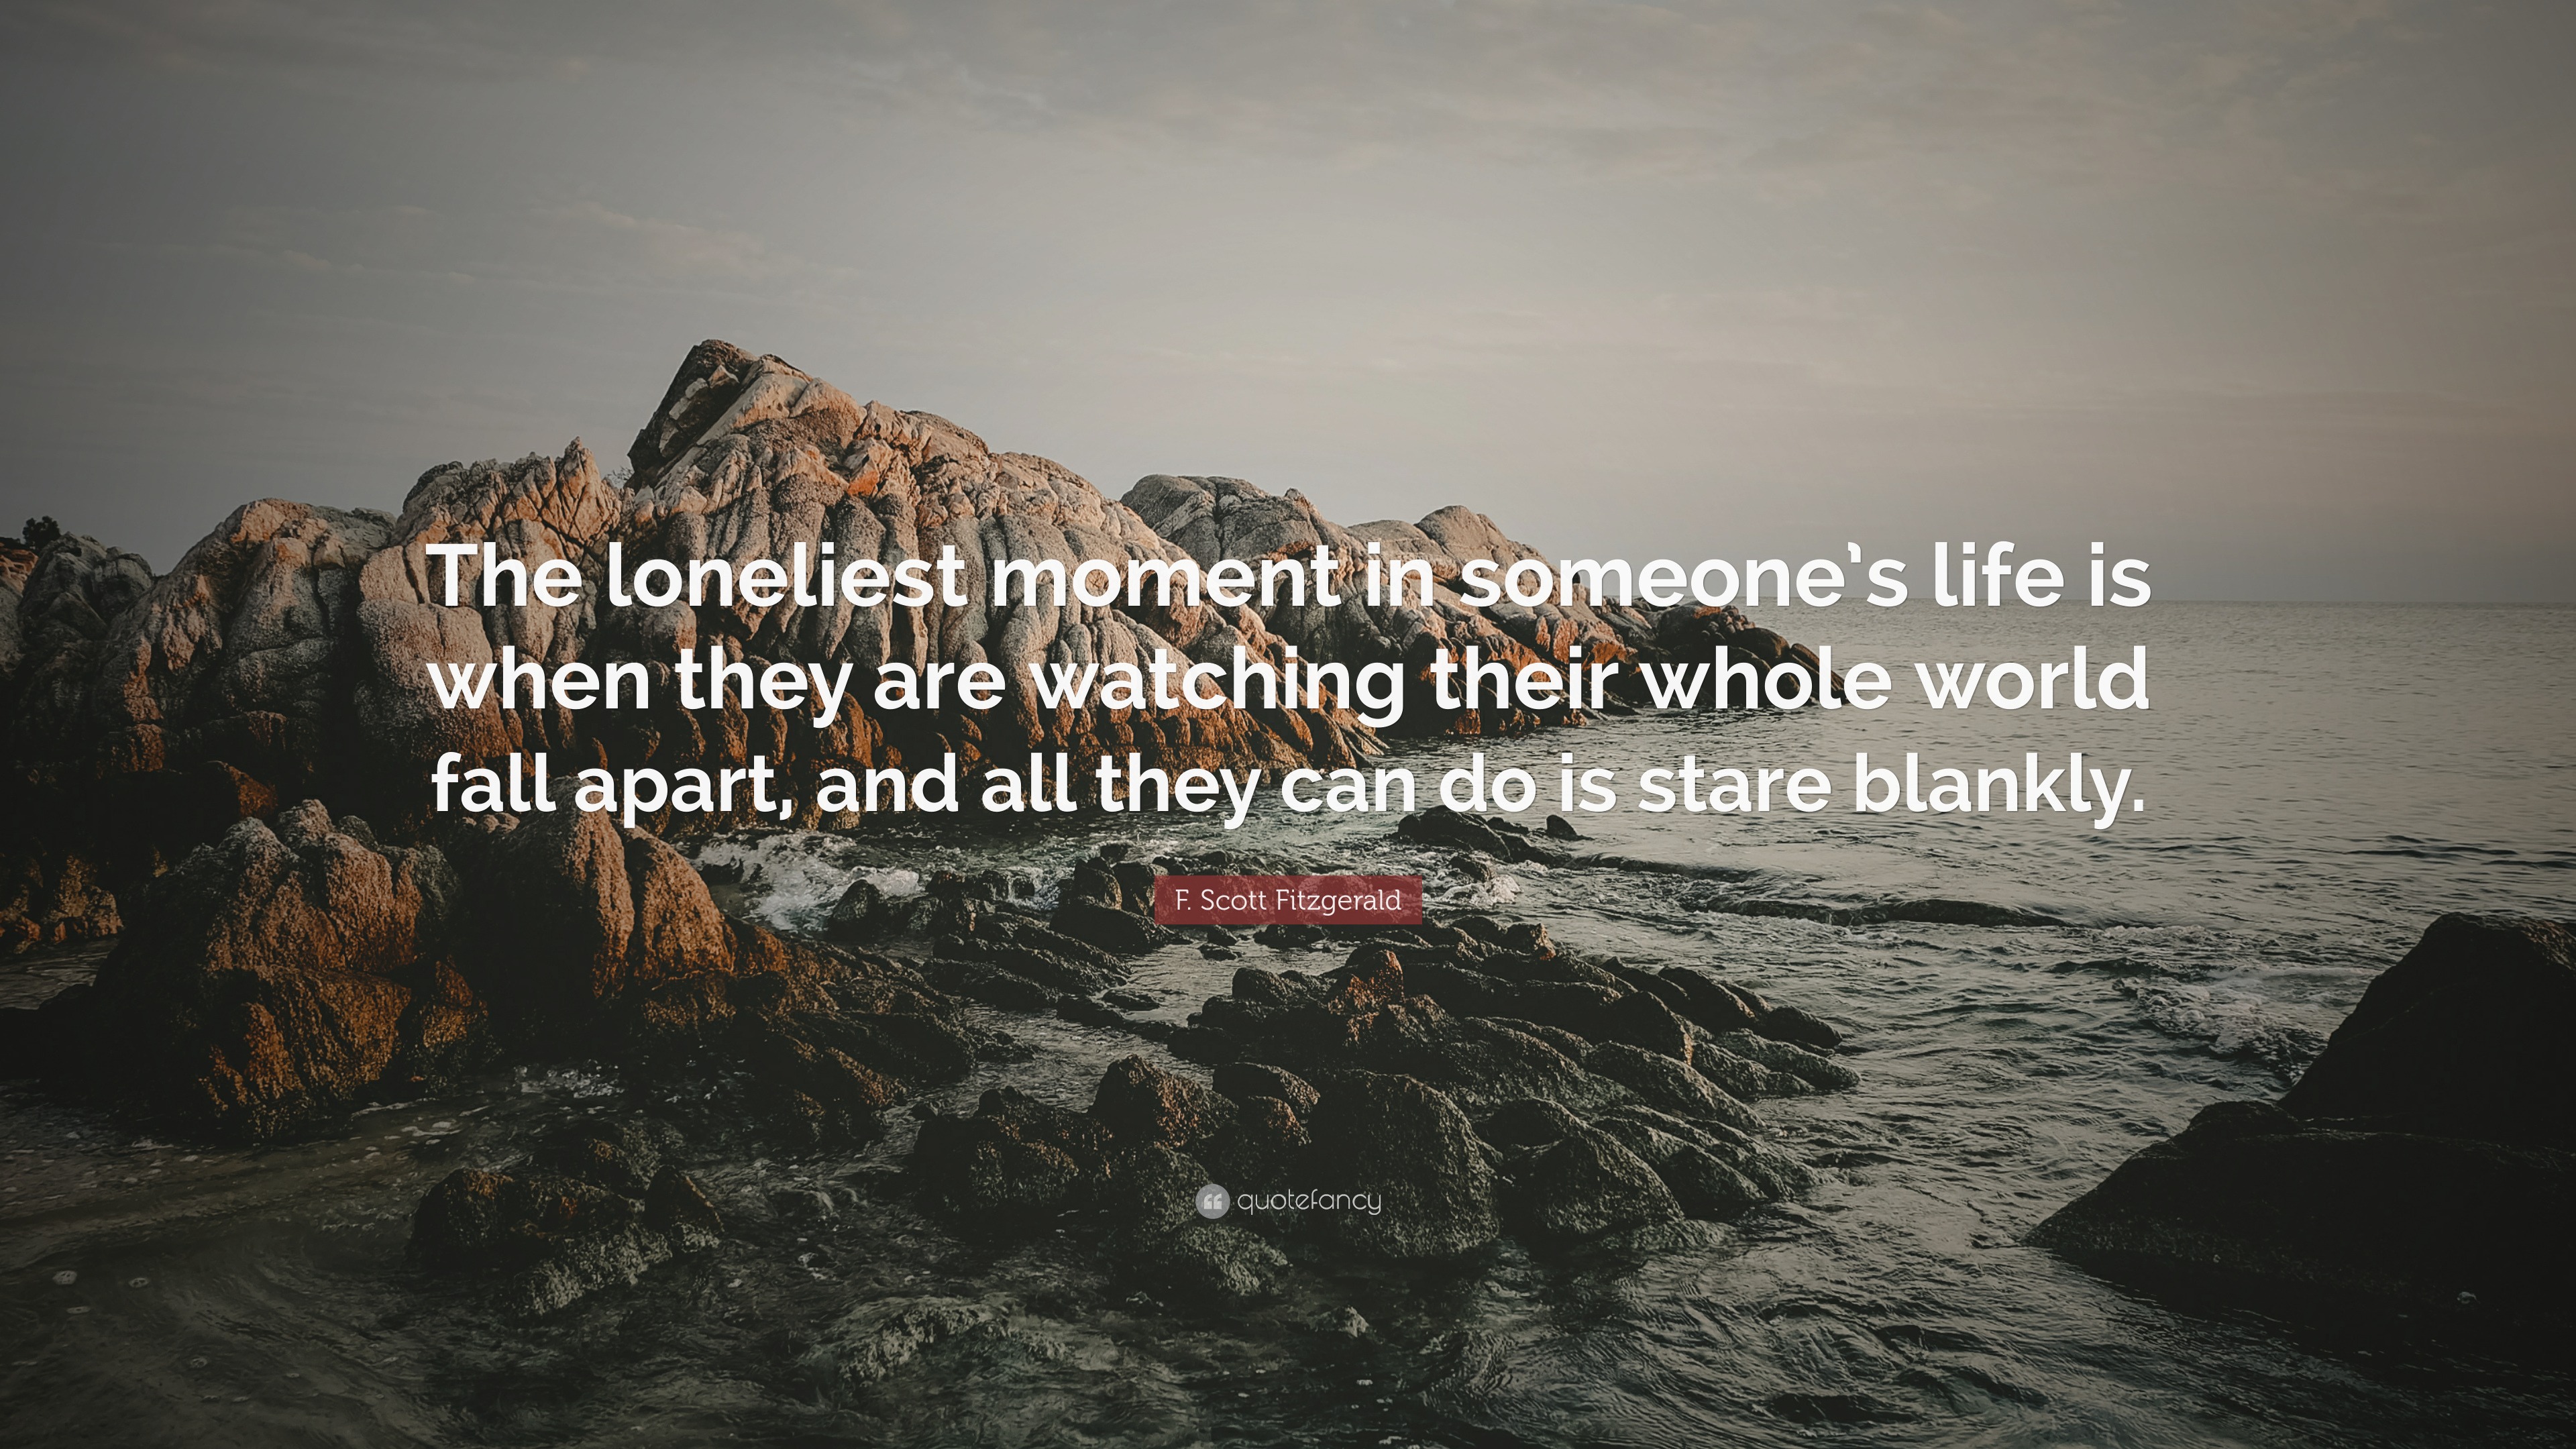 F. Scott Fitzgerald Quote: “The loneliest moment in someone’s life is ...